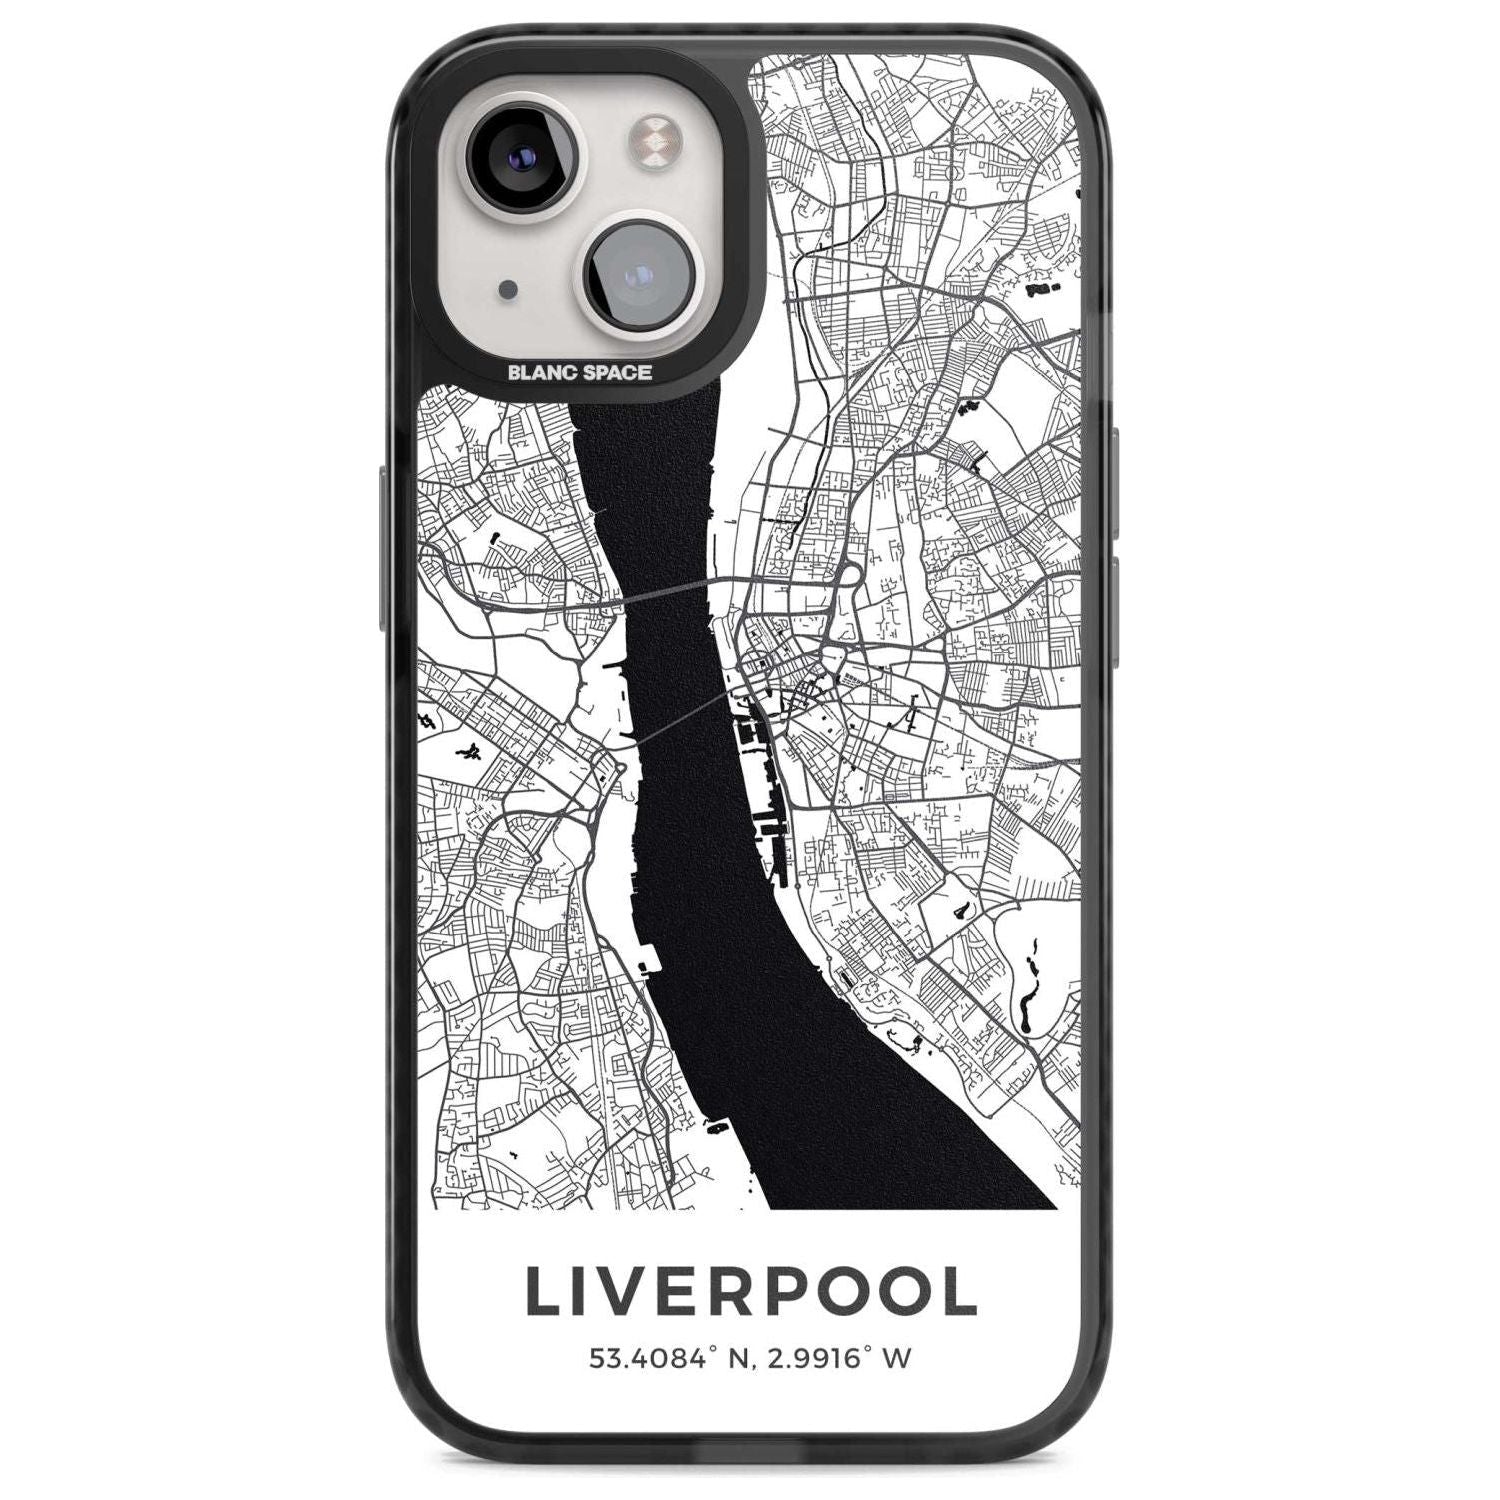 Map of Liverpool, England Phone Case iPhone 15 Plus / Magsafe Black Impact Case,iPhone 15 / Magsafe Black Impact Case,iPhone 14 Plus / Magsafe Black Impact Case,iPhone 14 / Magsafe Black Impact Case,iPhone 13 / Magsafe Black Impact Case Blanc Space